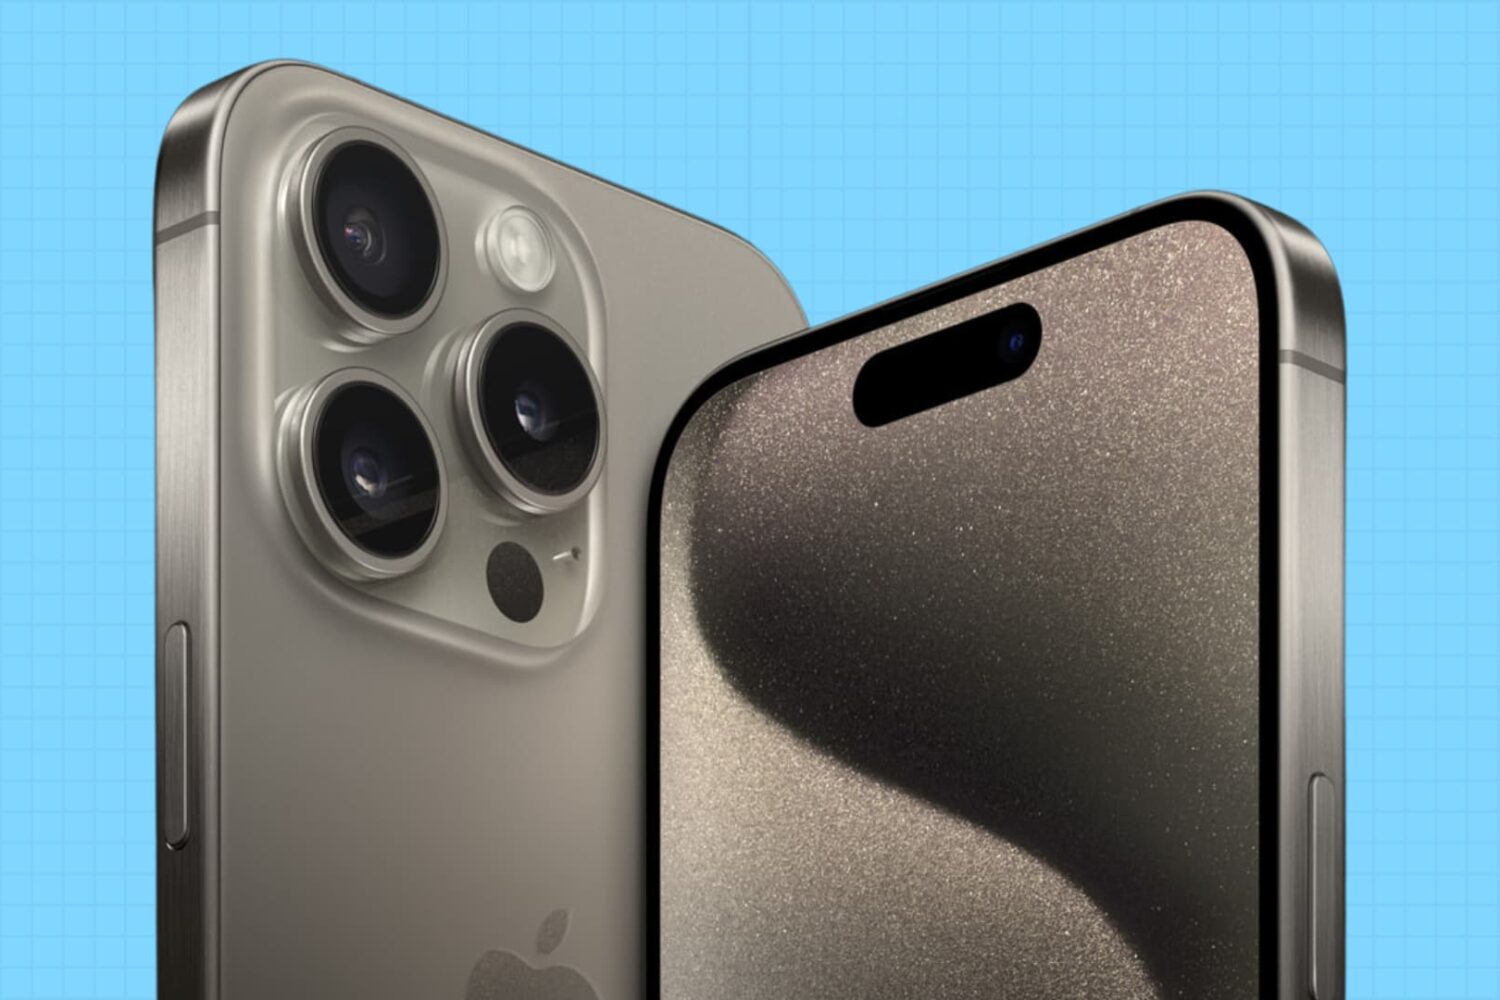 Image showing both the iPhone front and back set of cameras